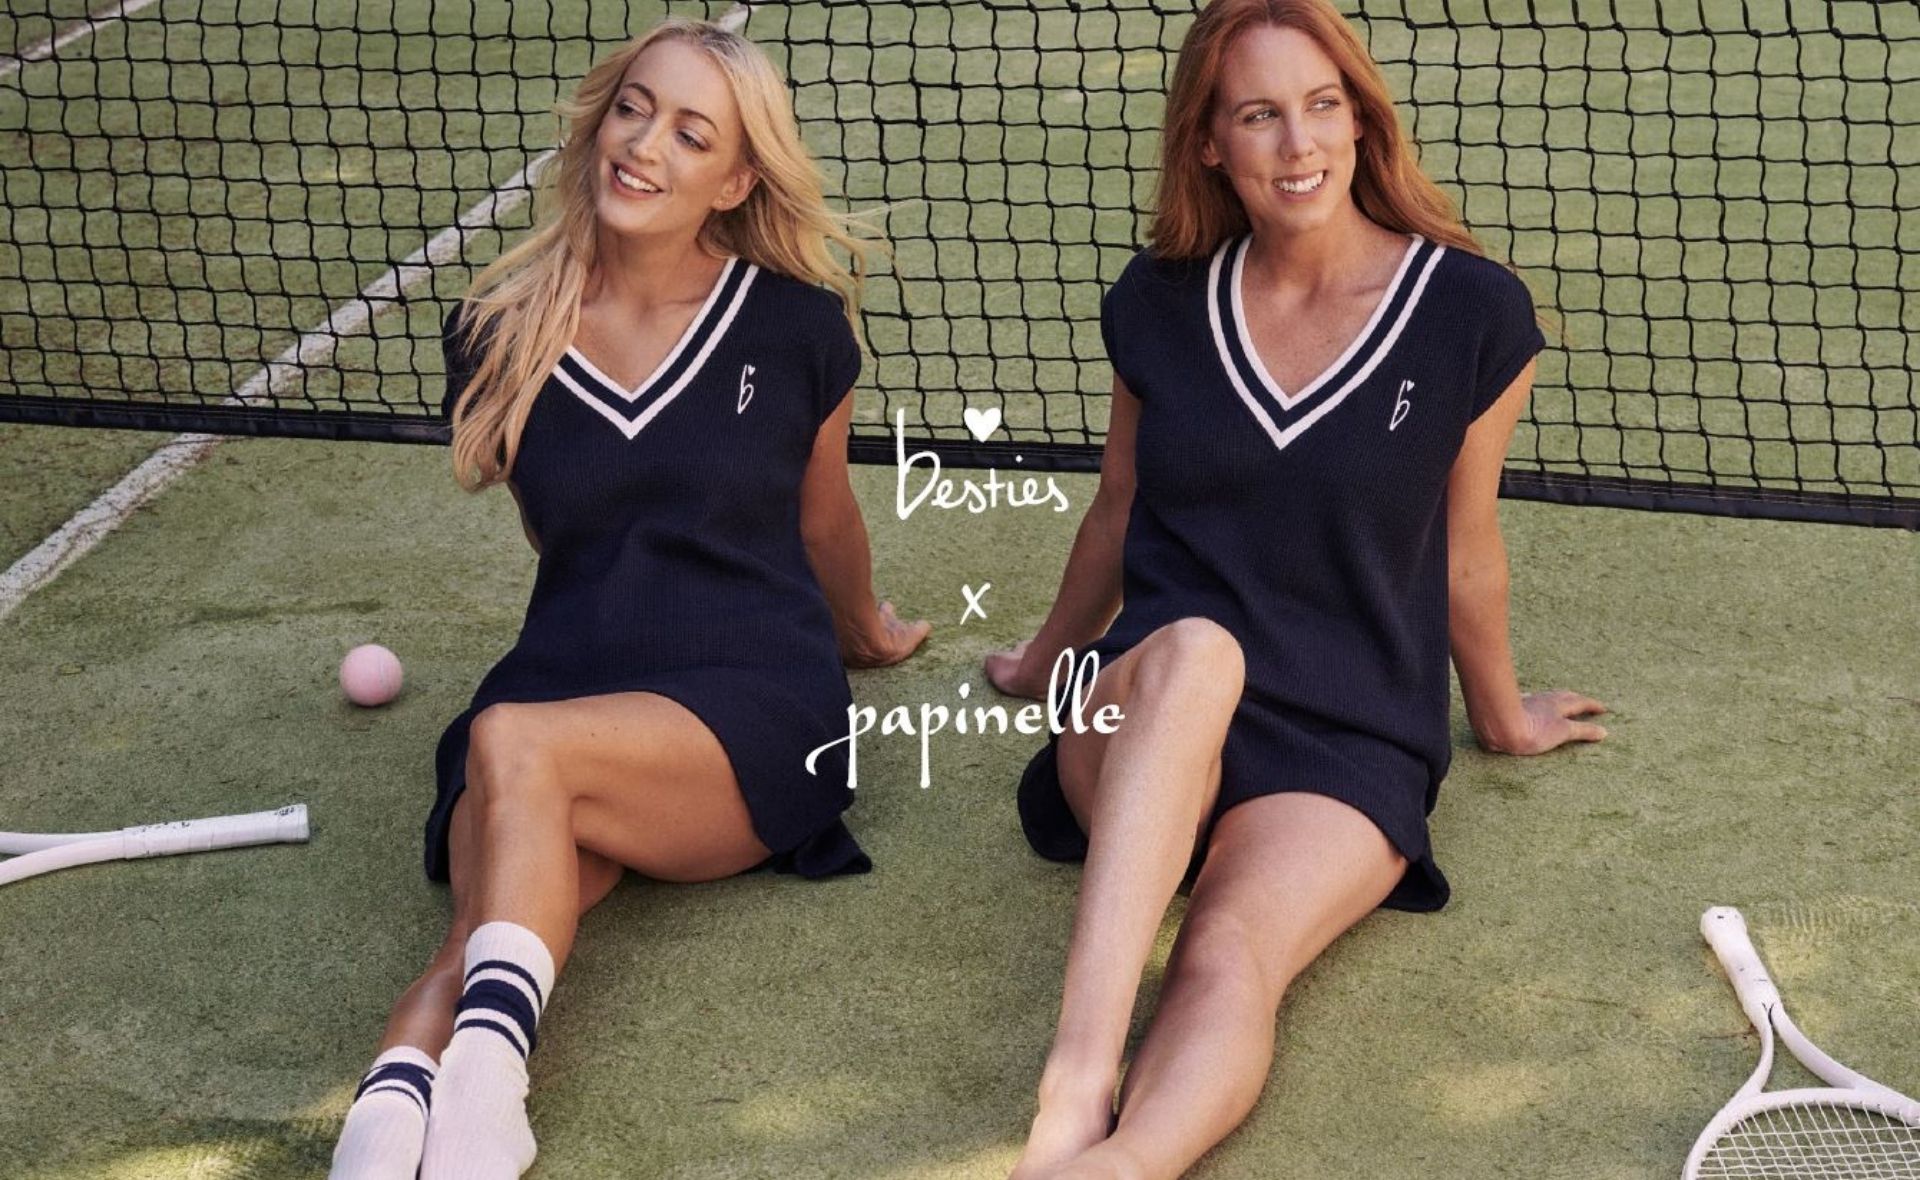 Jackie O's Besties collaboration with Papinelle